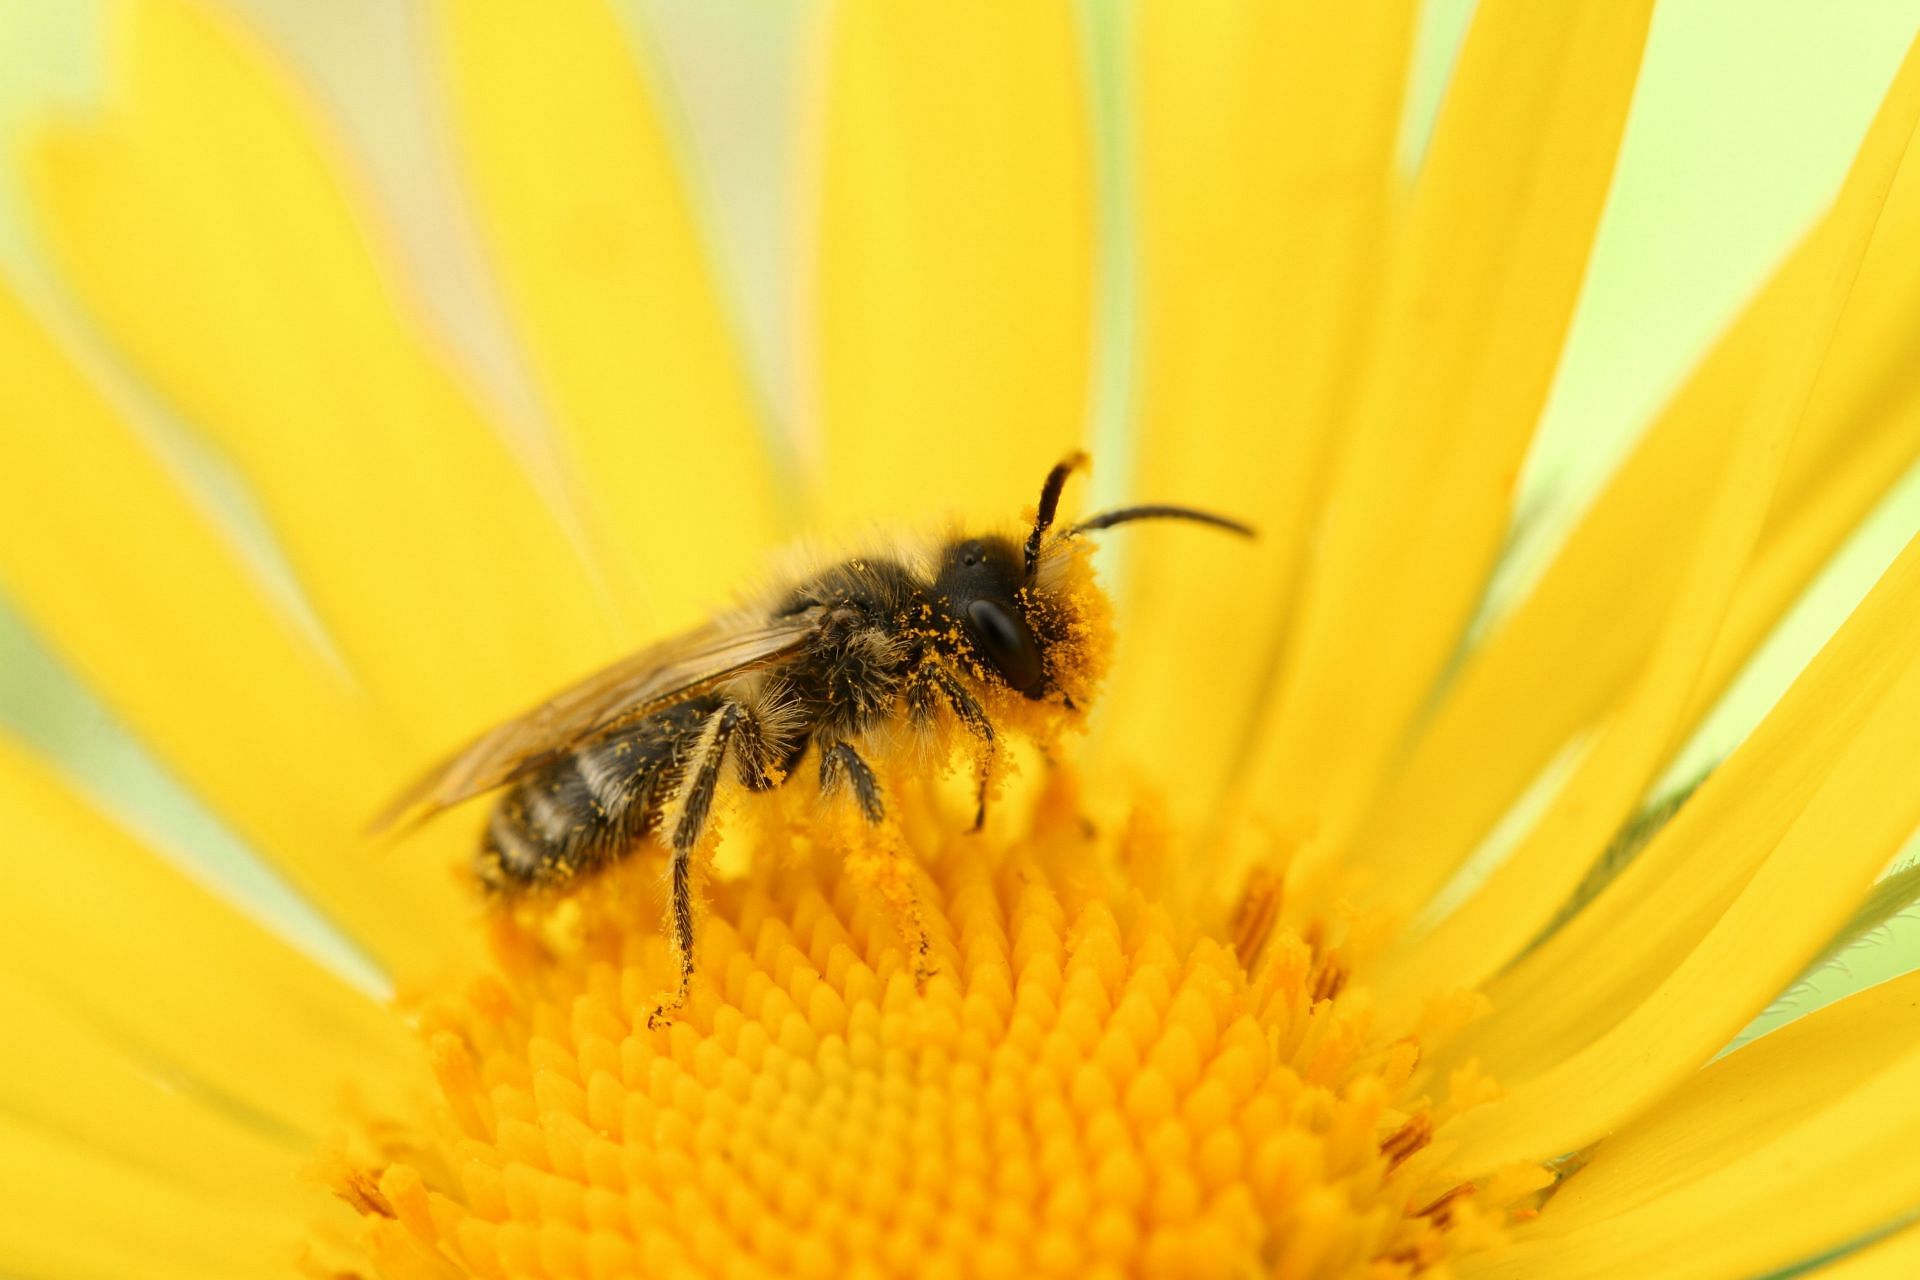 Bee pollens are harvested from bee hives. (Image via Unsplash/Christoph Polatzky)